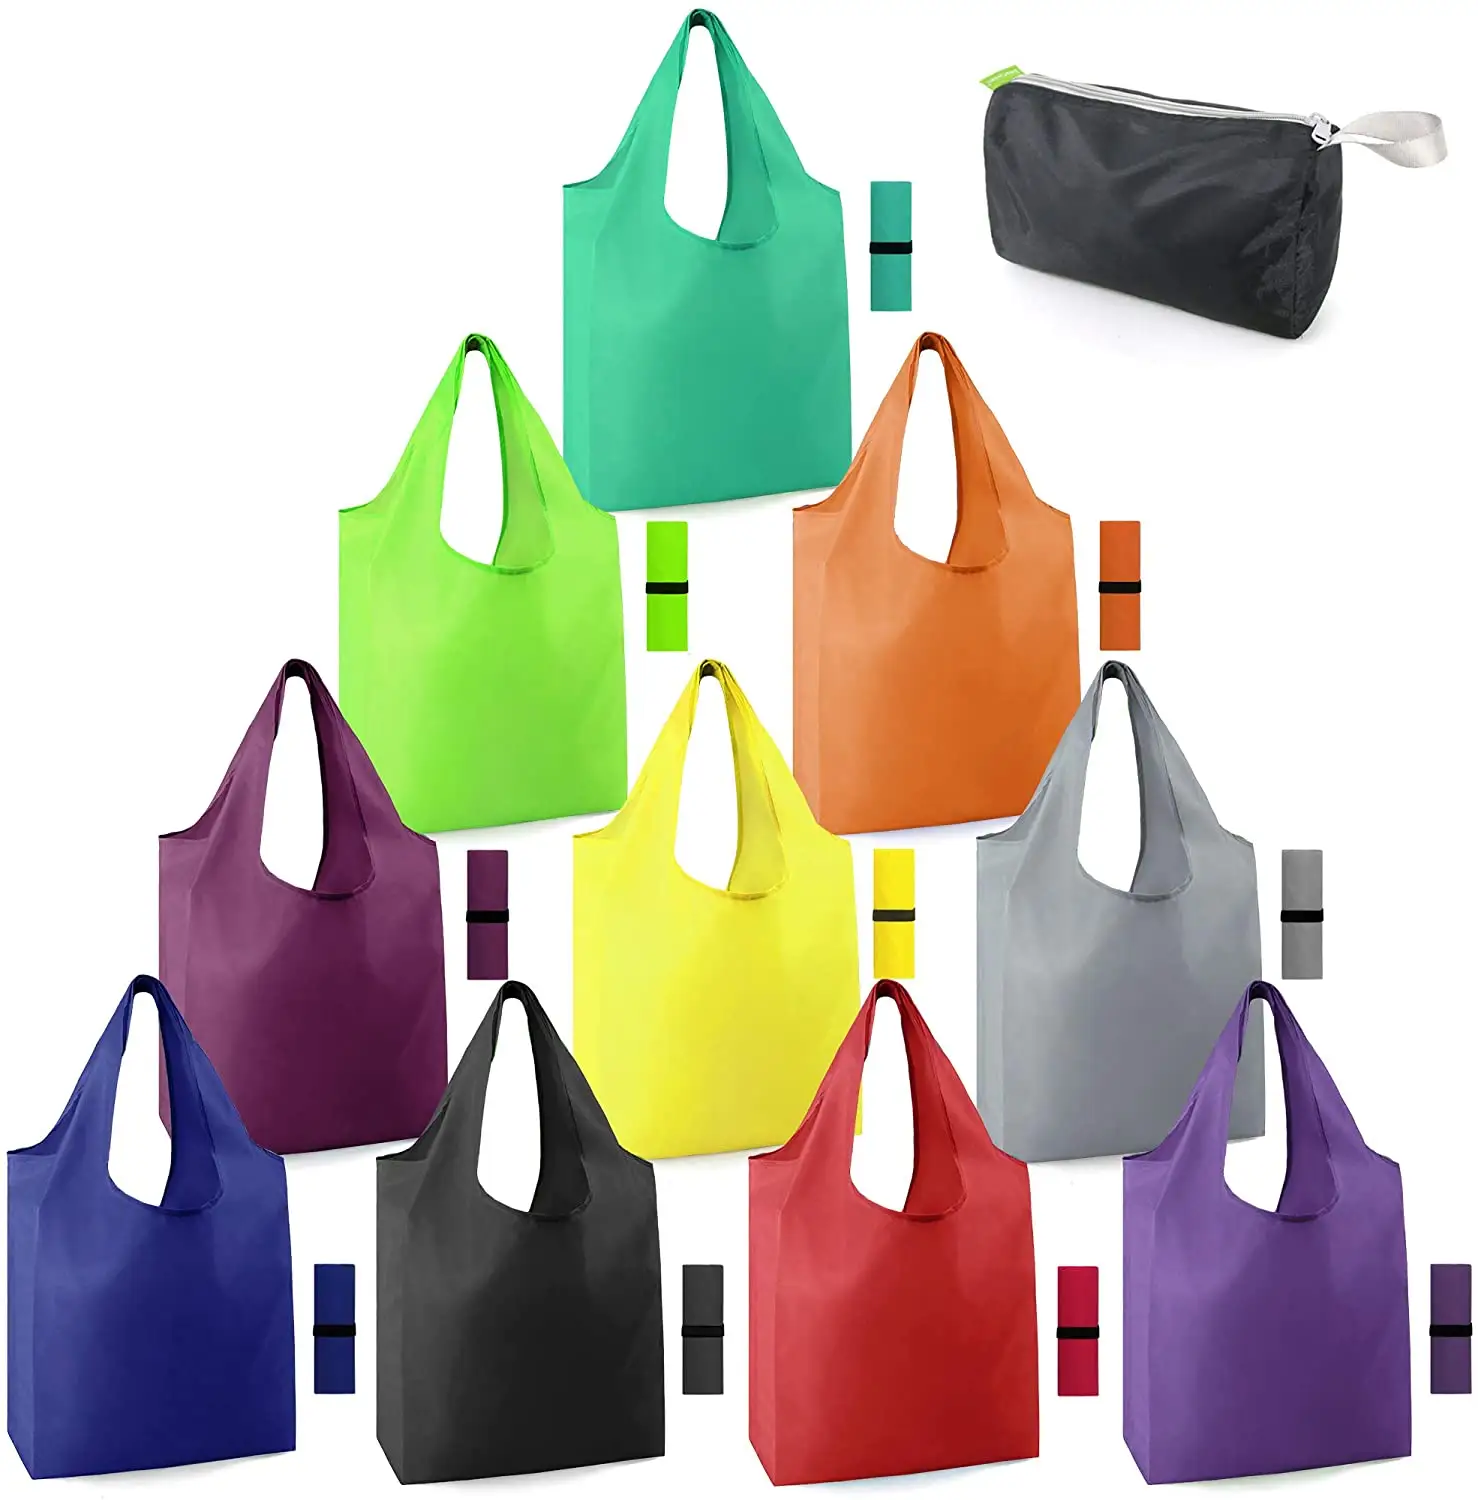 Low MOQ Custom Reusable Grocery Bags Foldable Machine Washable Tote Shopping Bags Bulk Extra Large Tote Bag Folded Into A Pouch